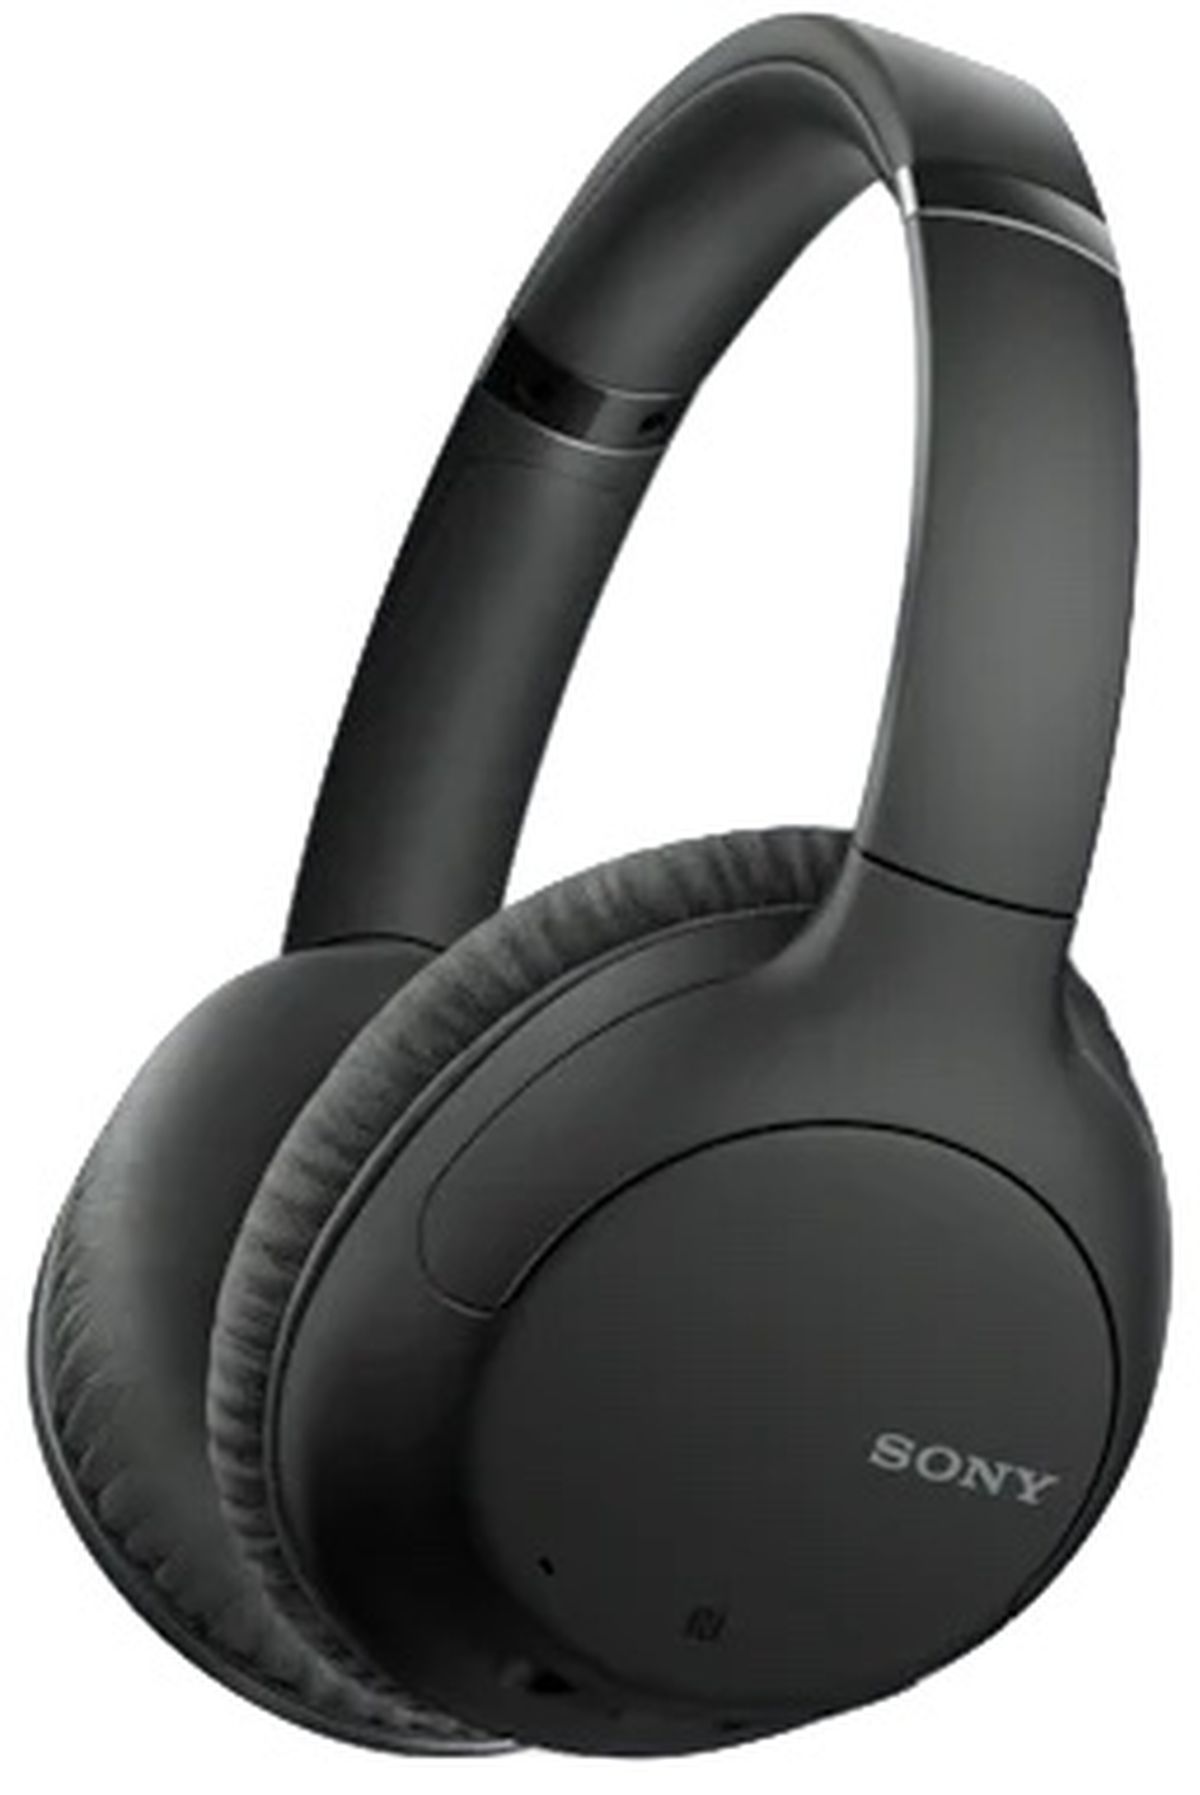 Audifonos Sony Inalambricos WH-CH720N 35hrs Bluetooth